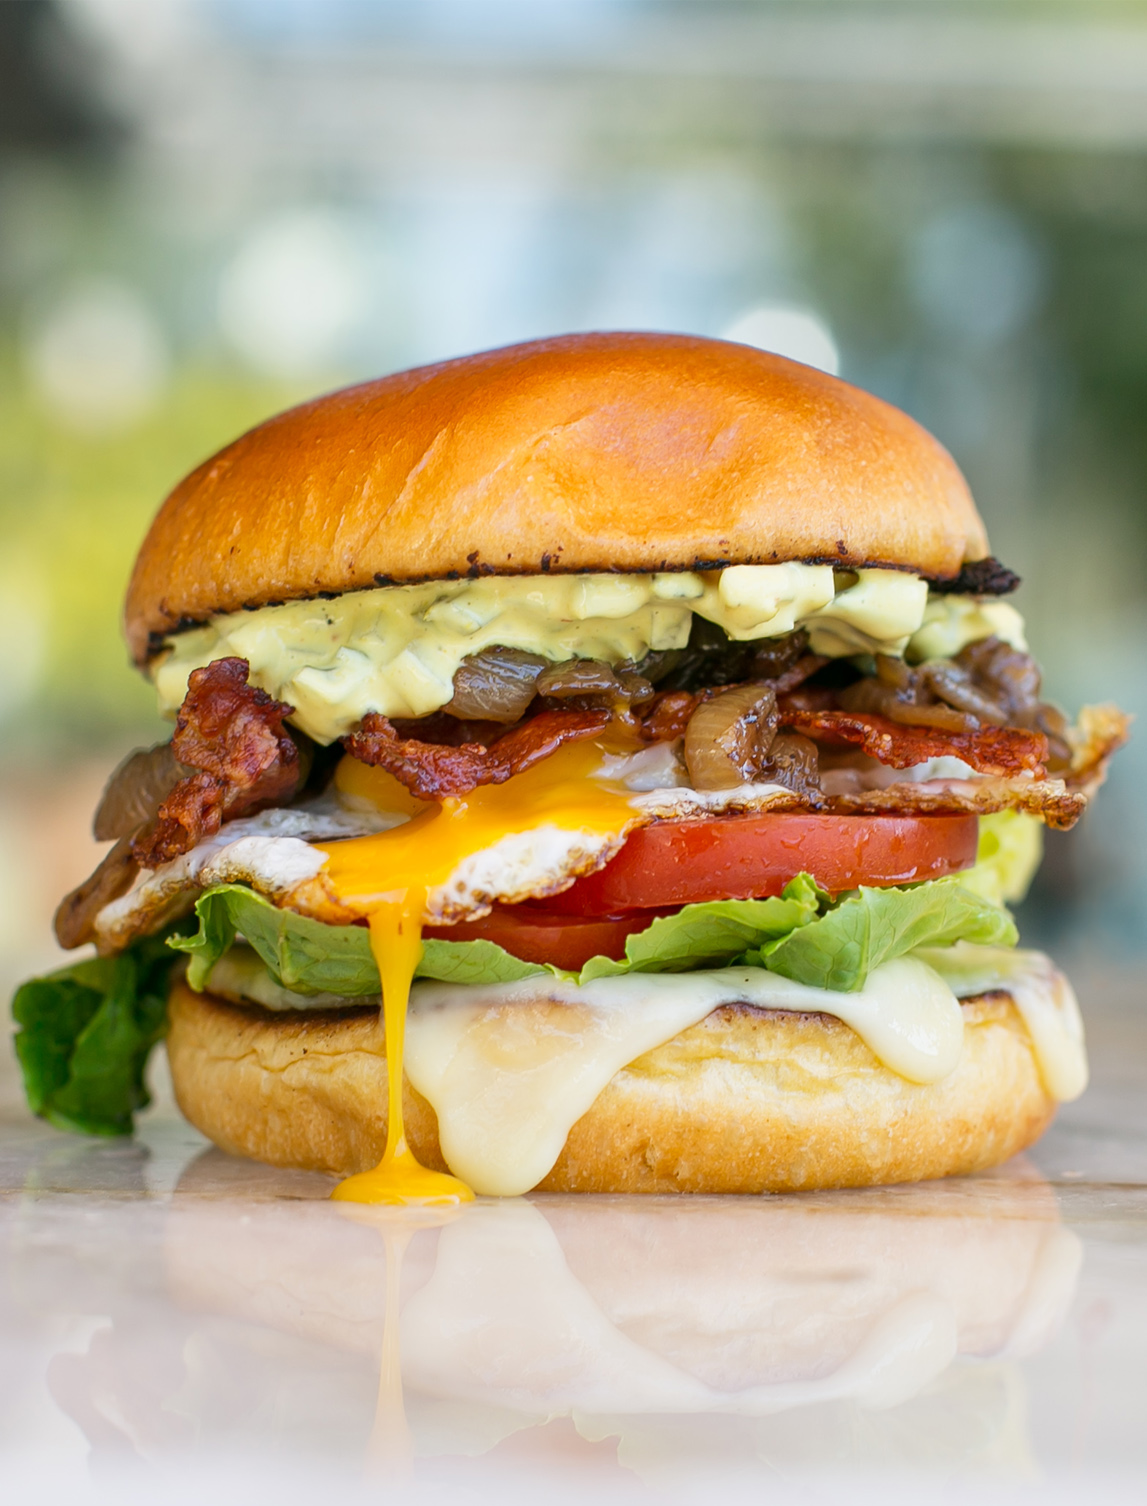 The Ultimate Bacon Cheeseburger Recipe - Make Your Meals